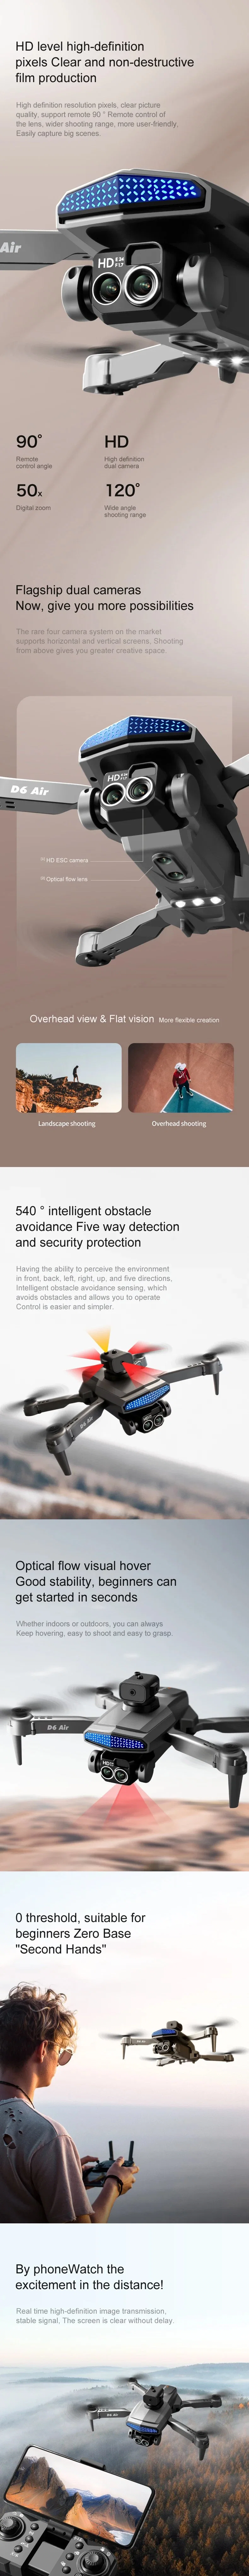 Foldable Remote Control Drone 4K HD Dual Camera Obstacle Avoidance Optical Flow Remote Control Quadcopter Drone